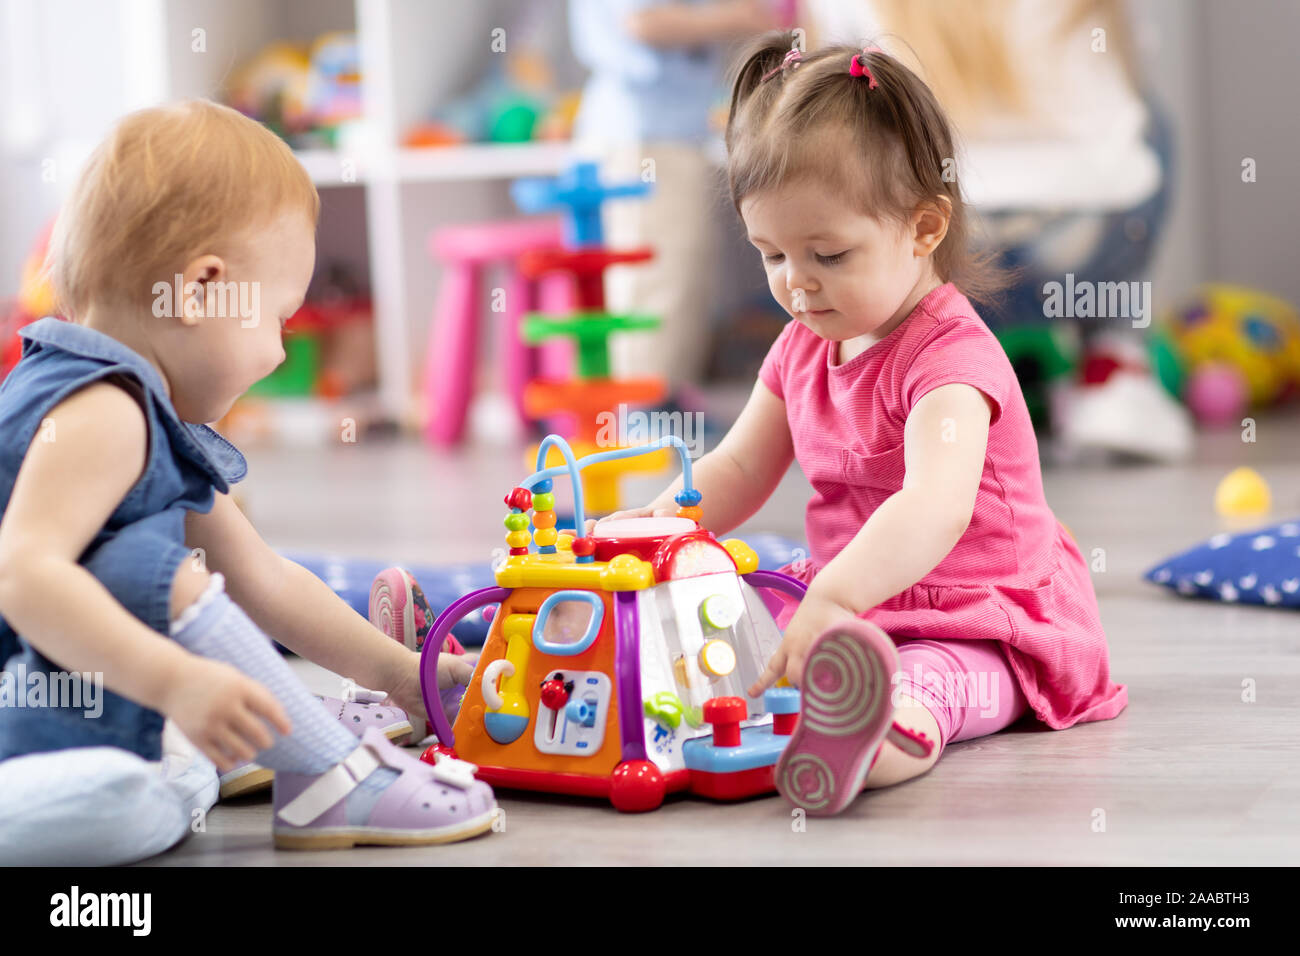 Children play together in kindergarten or day care centre Stock Photo